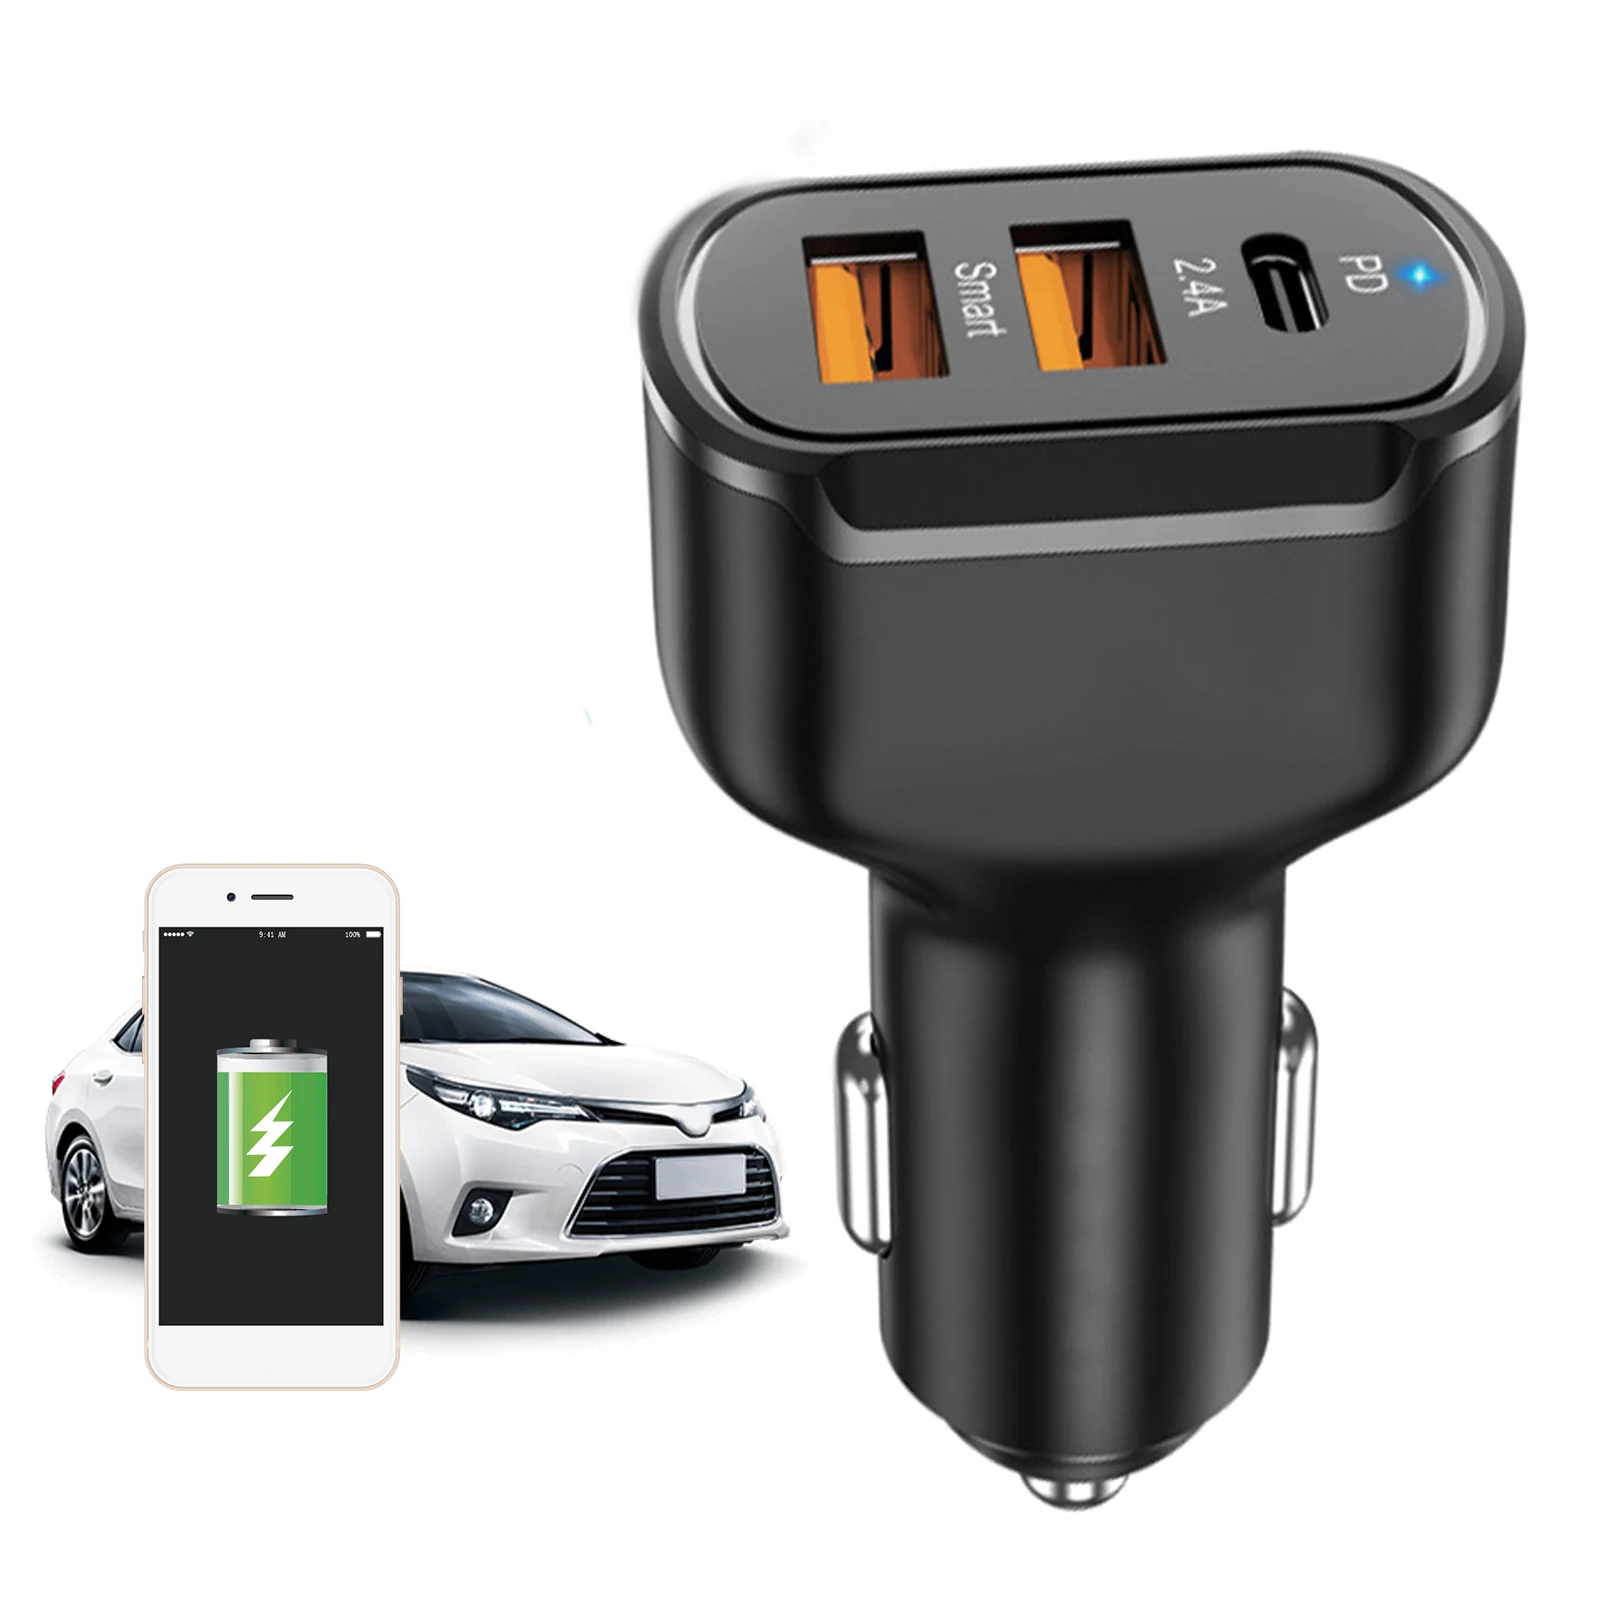 Купи USB C Car Phone Charger PD Mini Fast USB Car Charger Adapter Over Charge Protection 3 Ports Compatible With Most Smart Phones за 127 рублей в магазине AliExpress